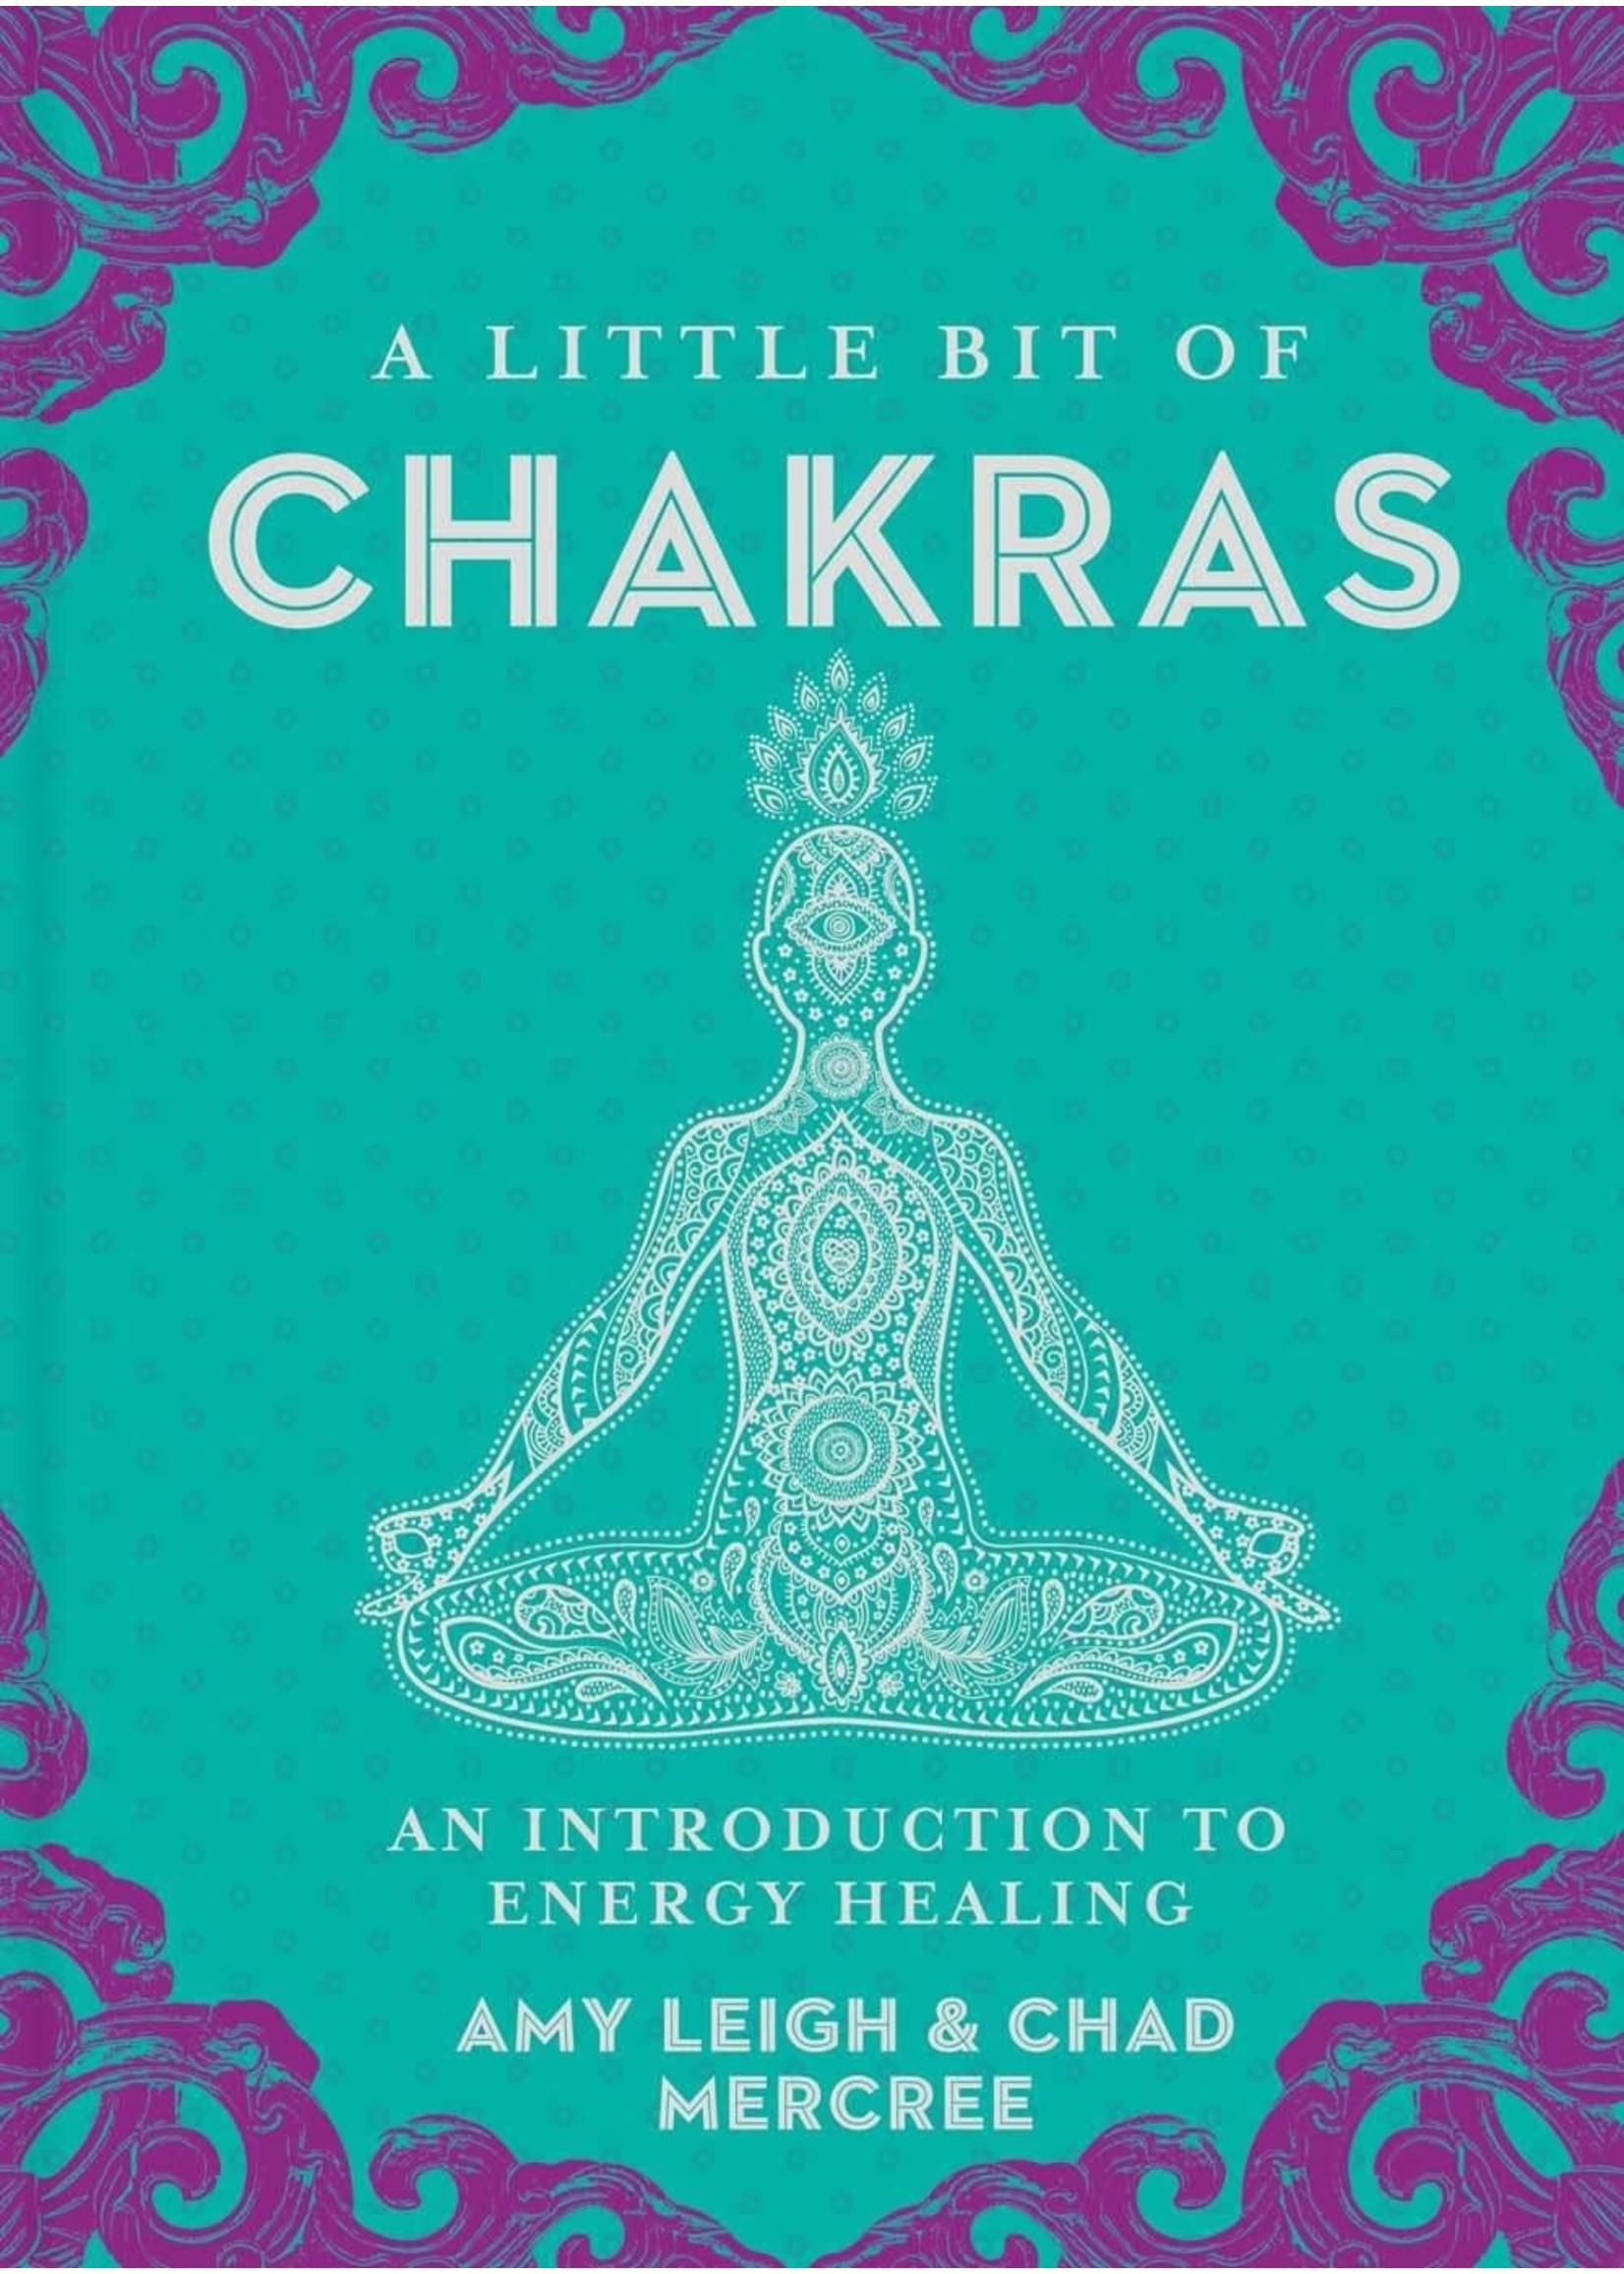 A Little Bit of Chakras- An Introduction to Energy Healing